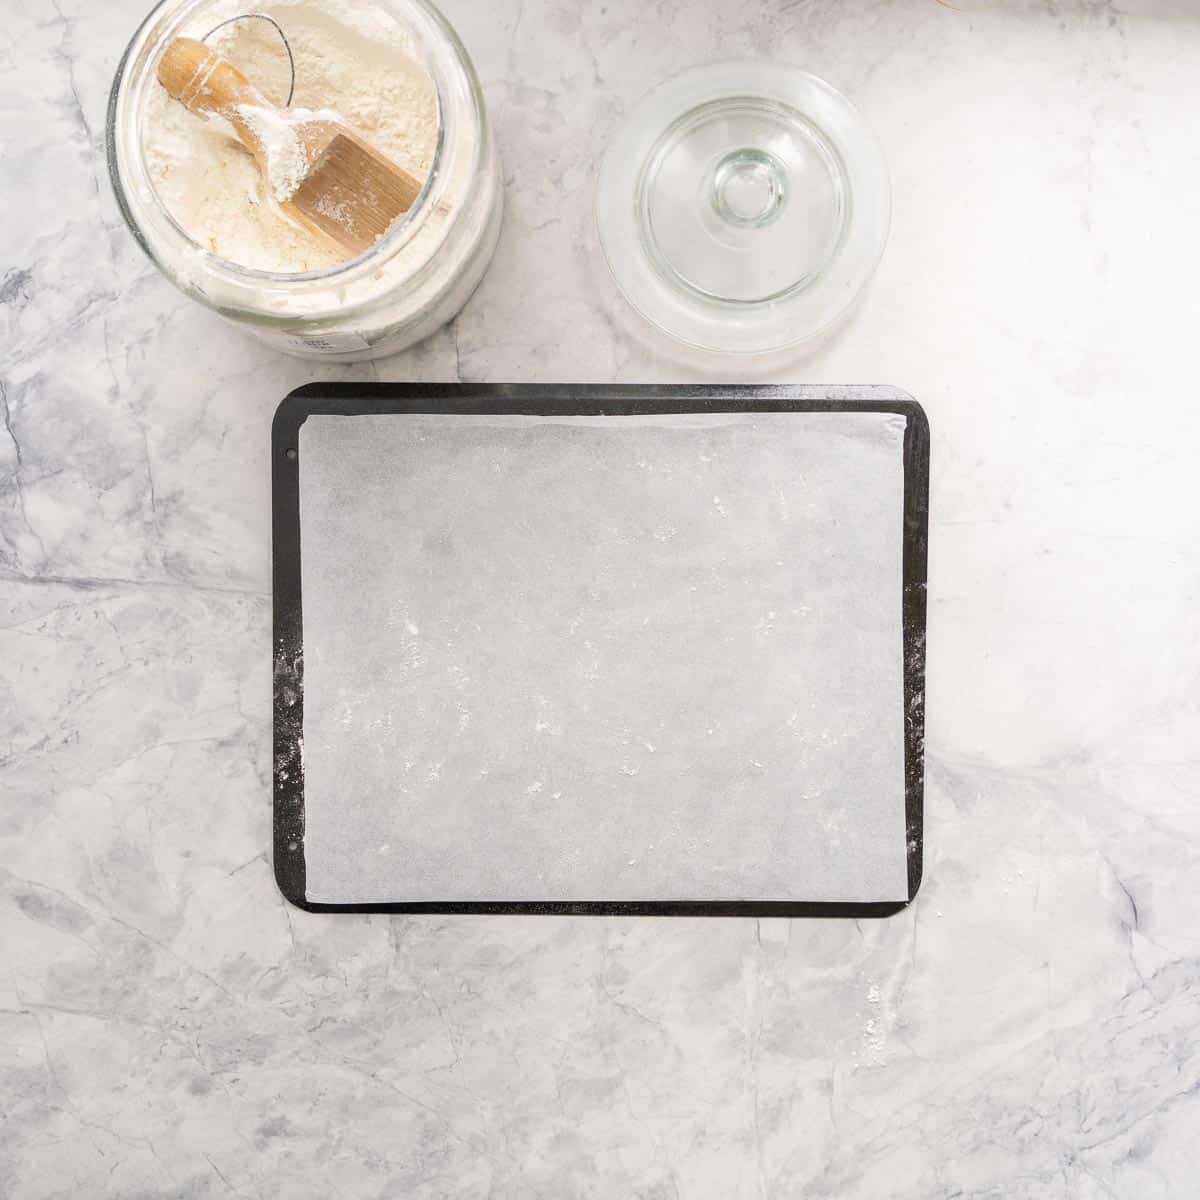 A lined and floured cookie sheet. 